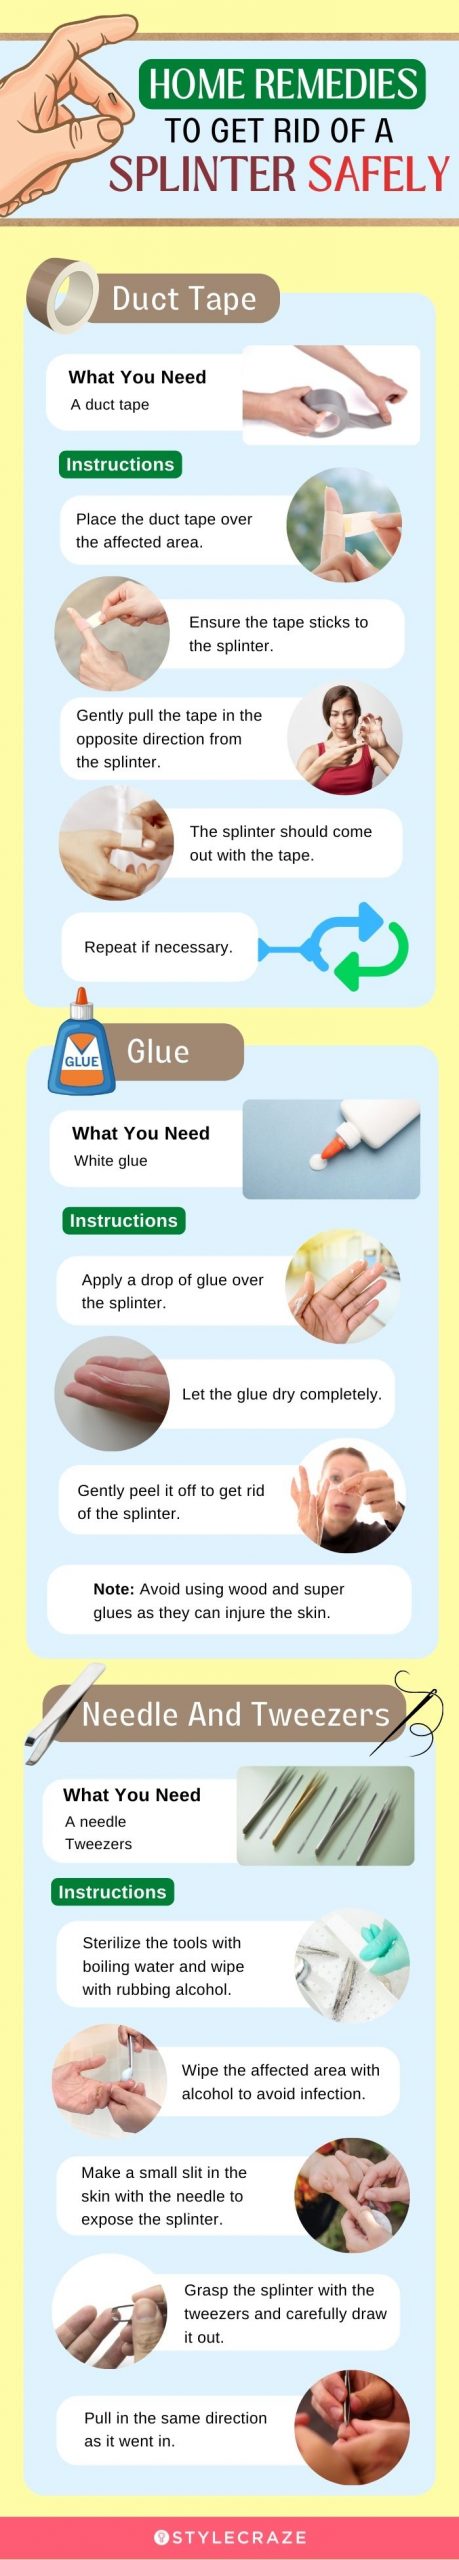 home remedies to get rid of a splinter safely [infographic]